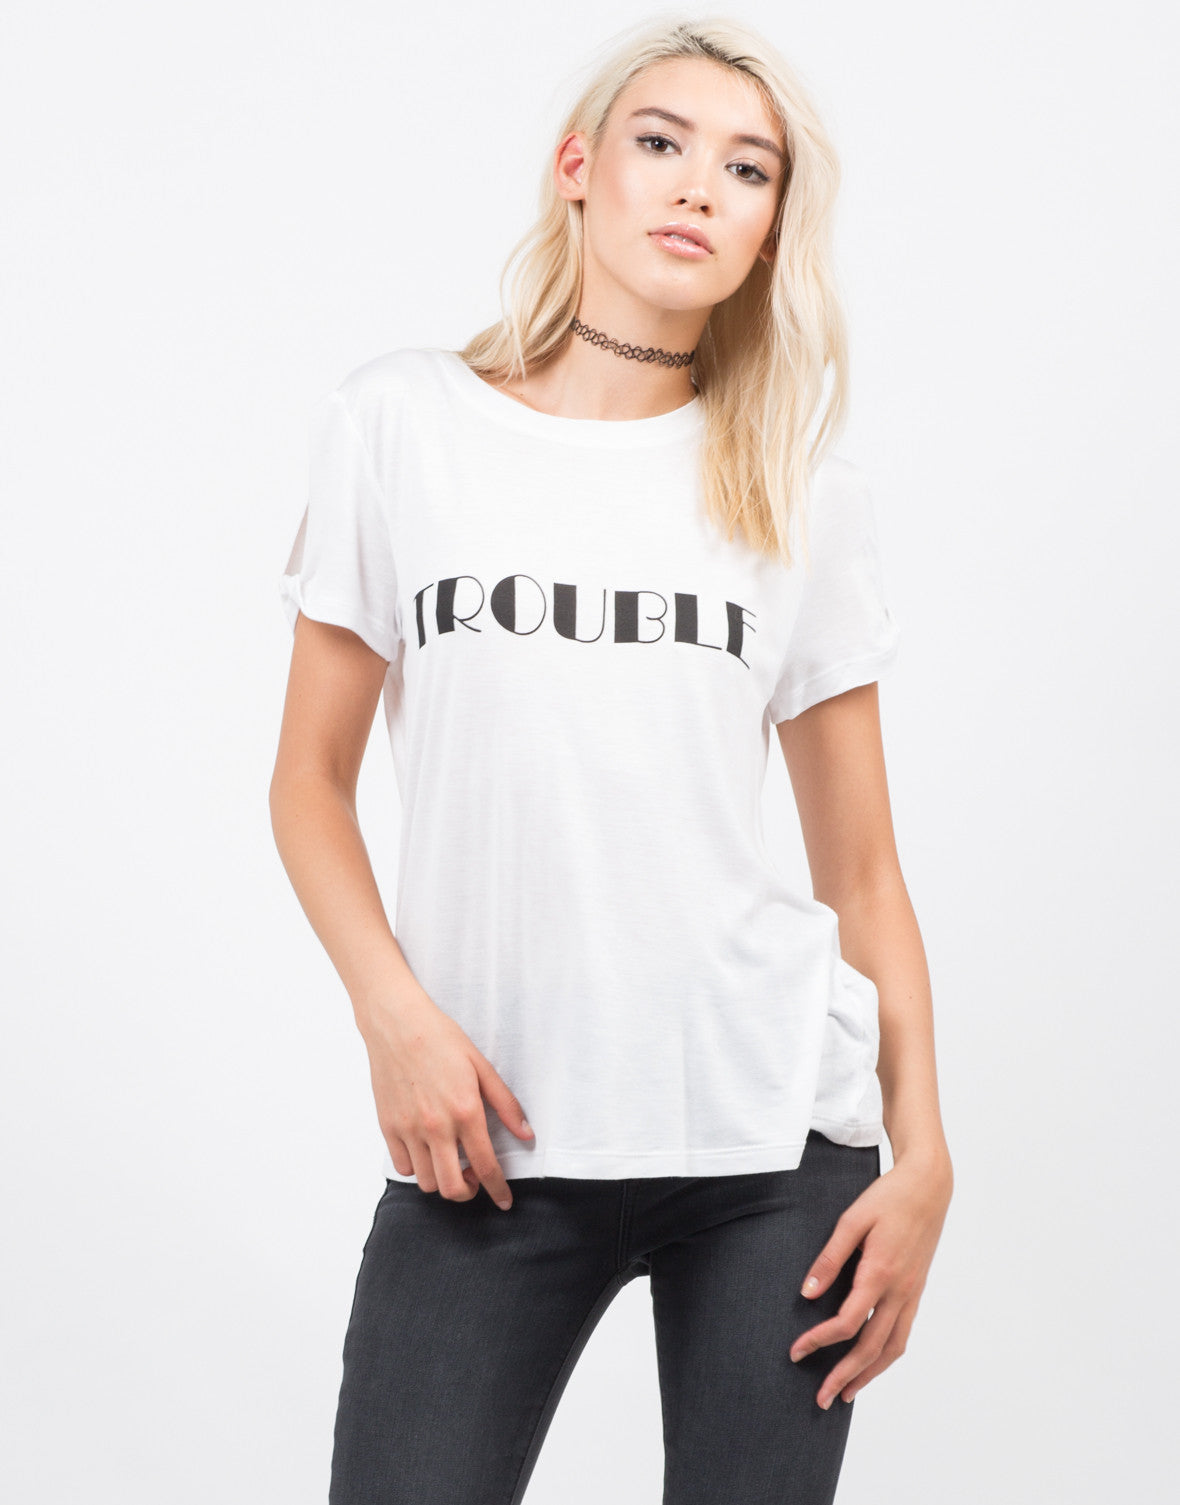 Trouble Graphic Tee - White T Shirt - Short Sleeve Tee – 2020AVE